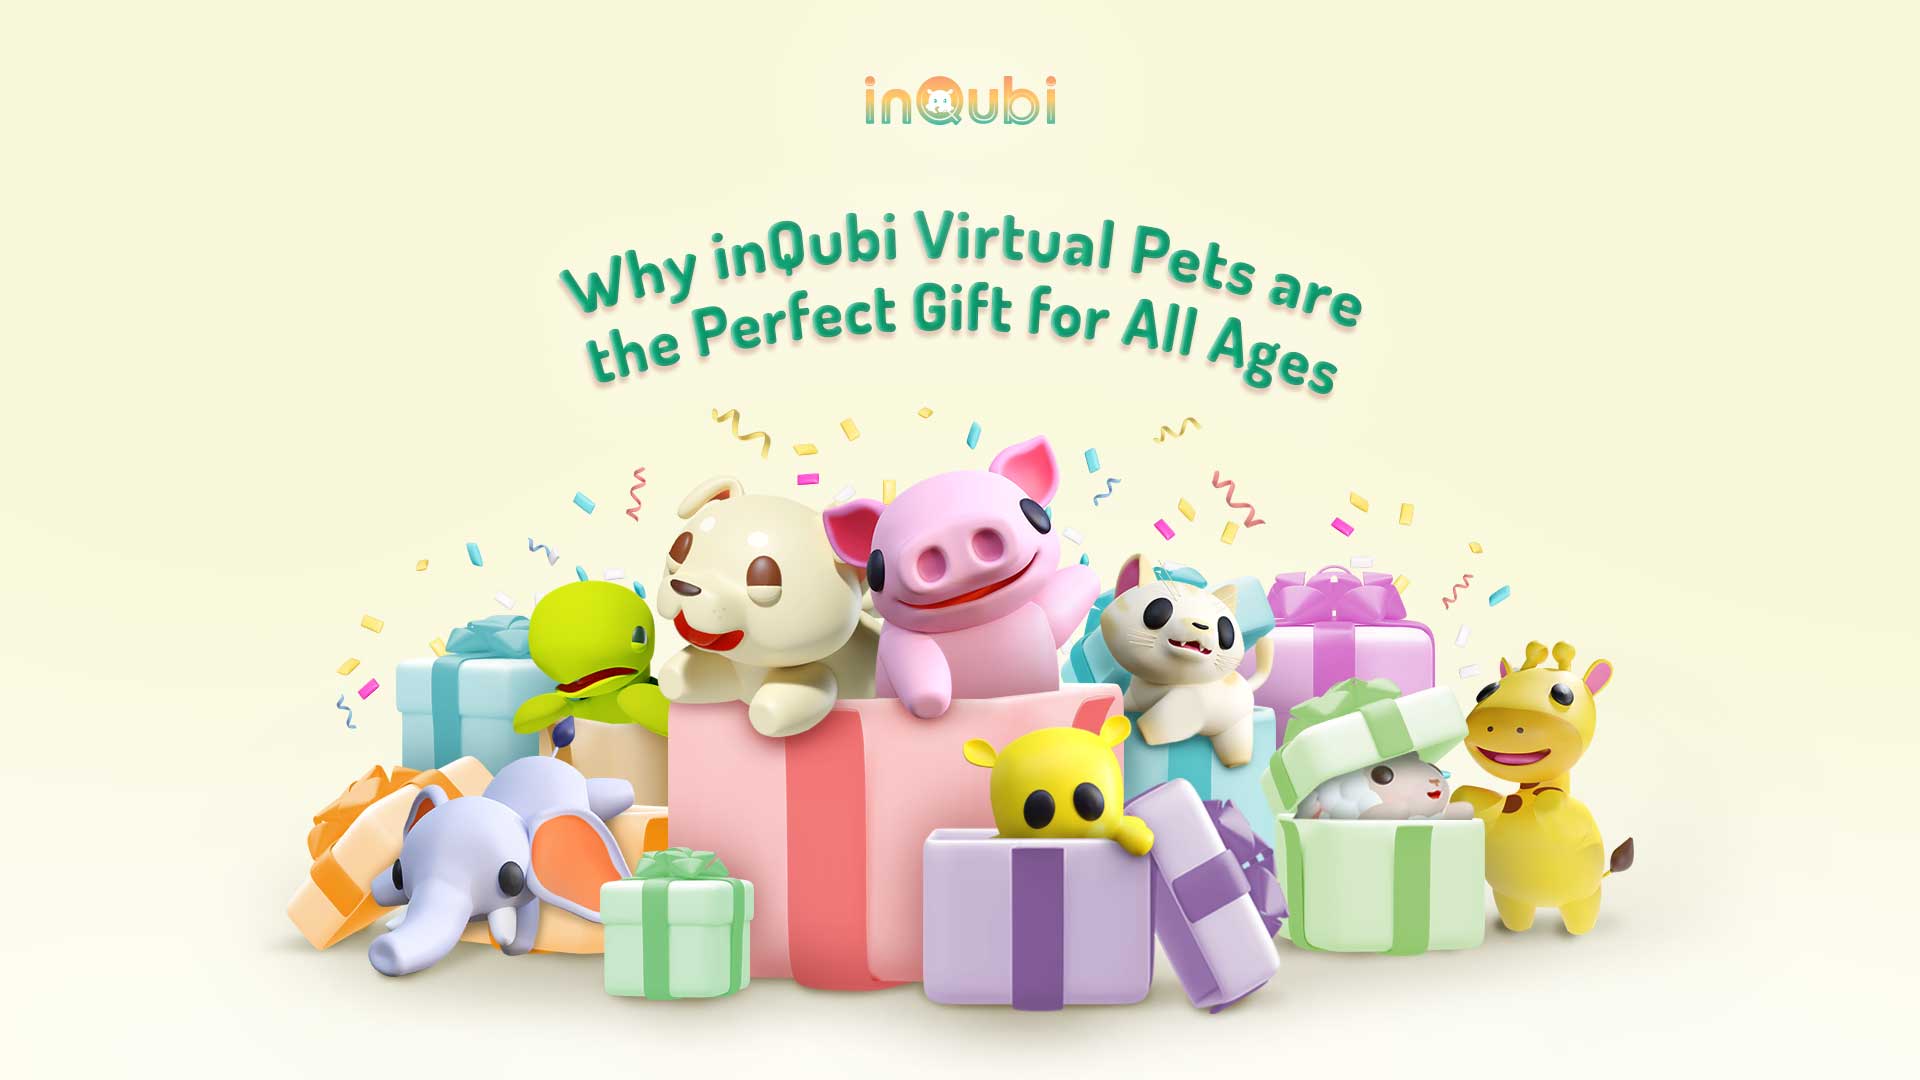 Why inQubi Virtual Pets are the Perfect Gift for All Ages